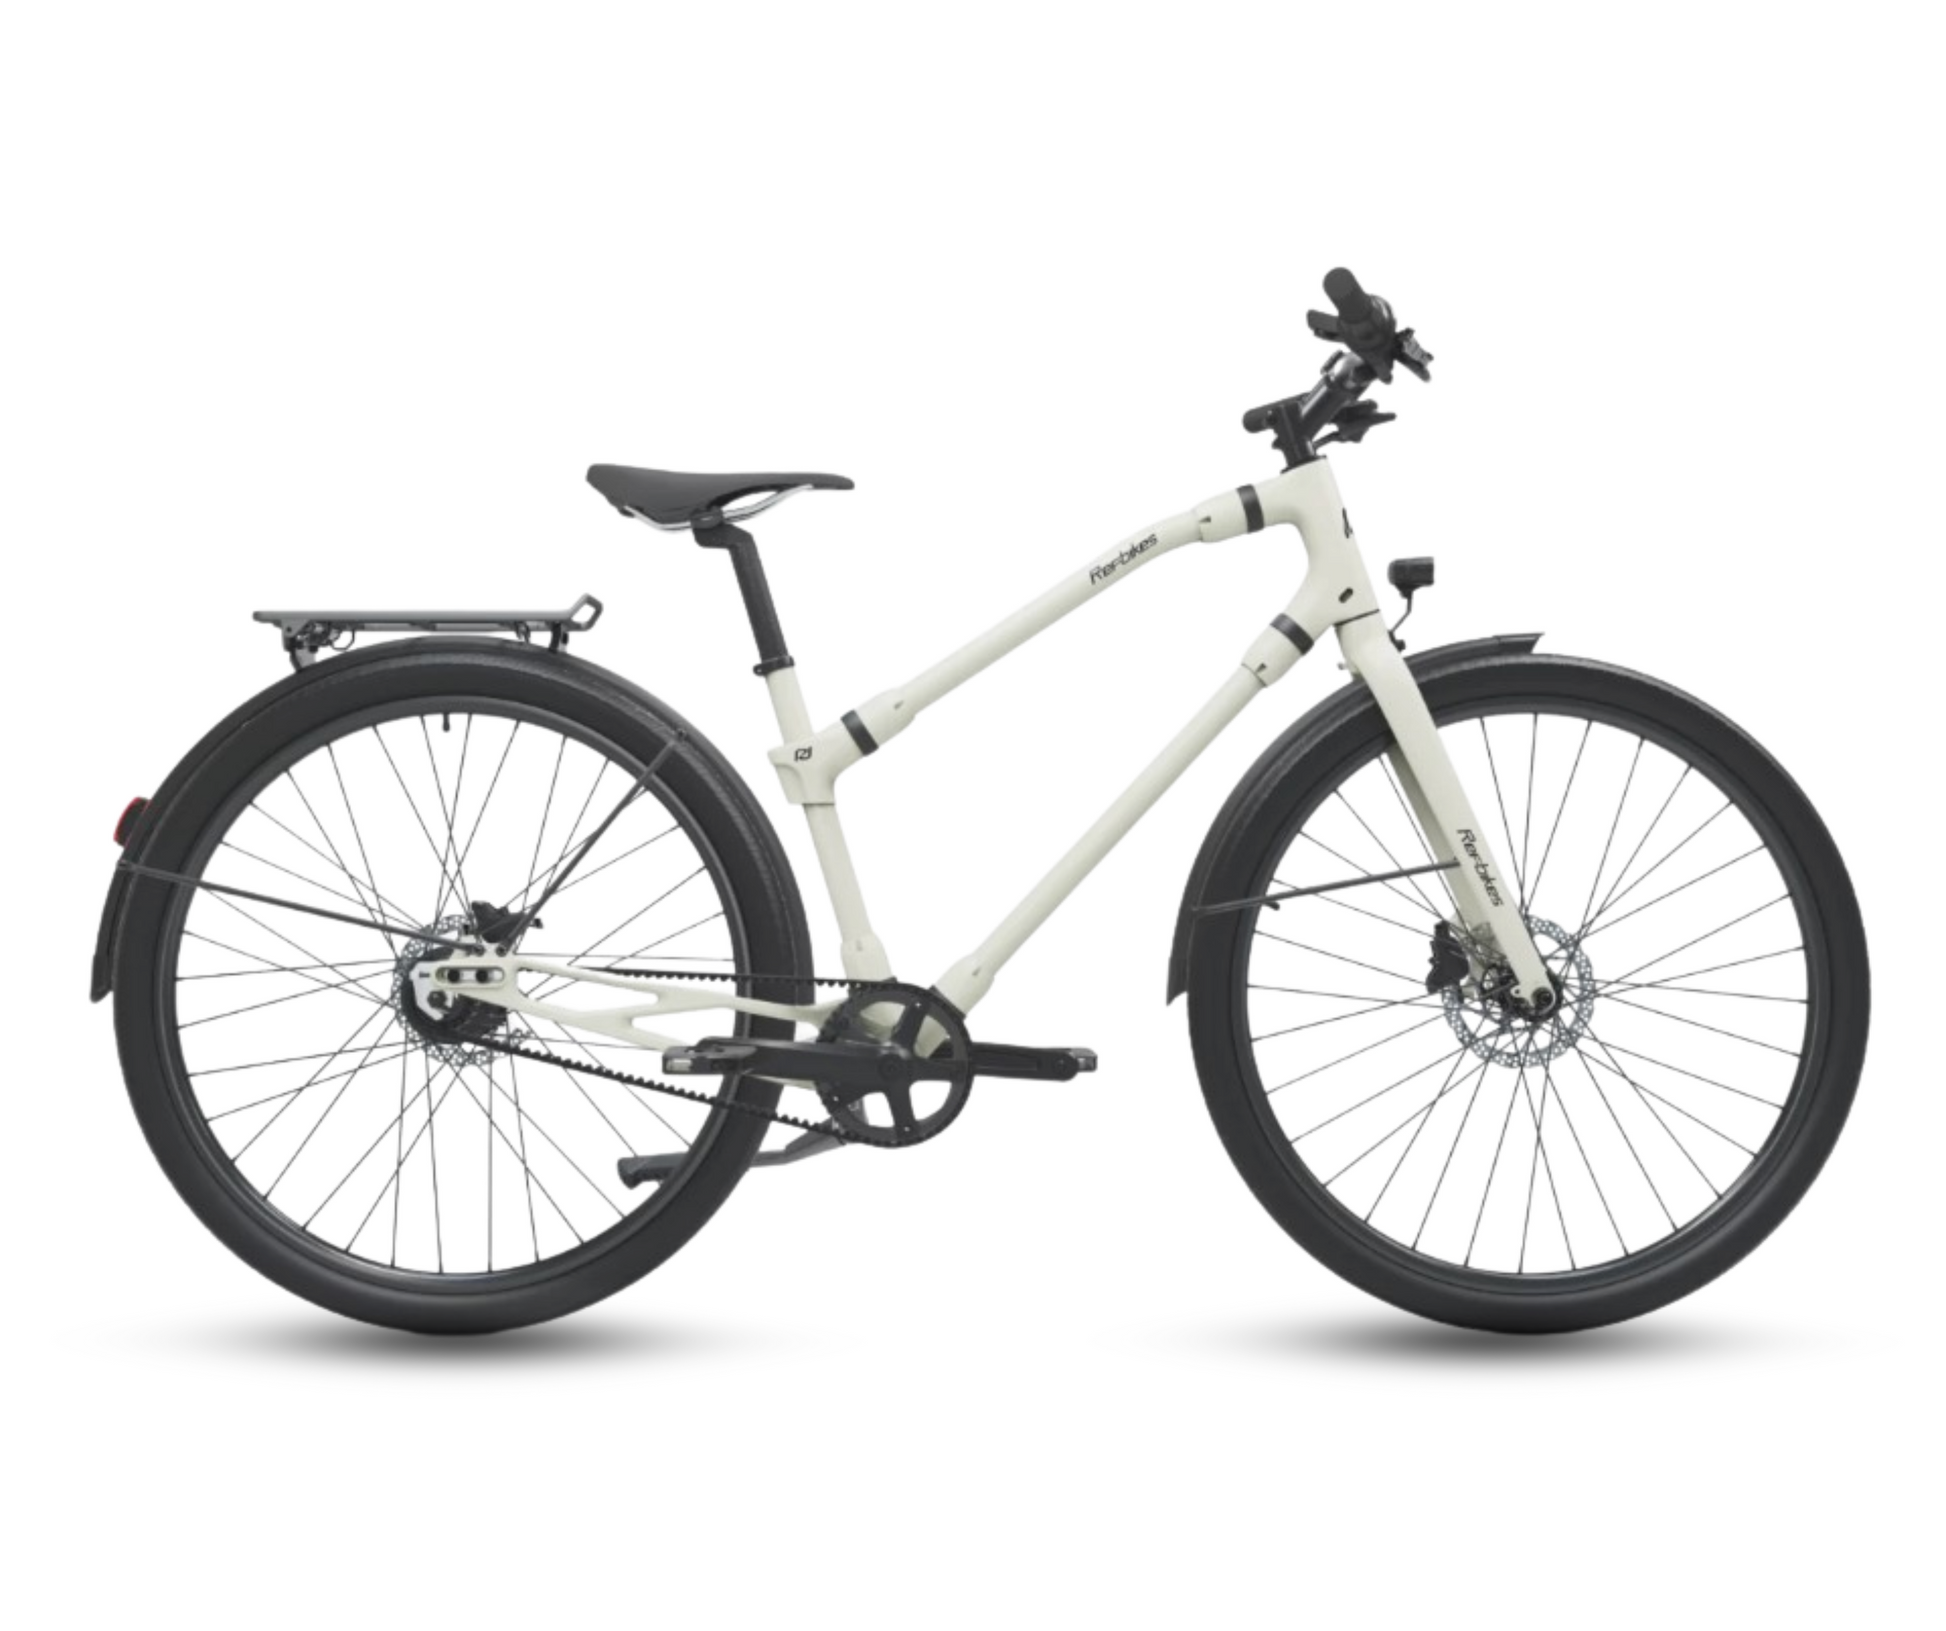 Elegant off-white Ref Urban bicycle, showcasing its minimalist frame and efficient design for urban landscapes